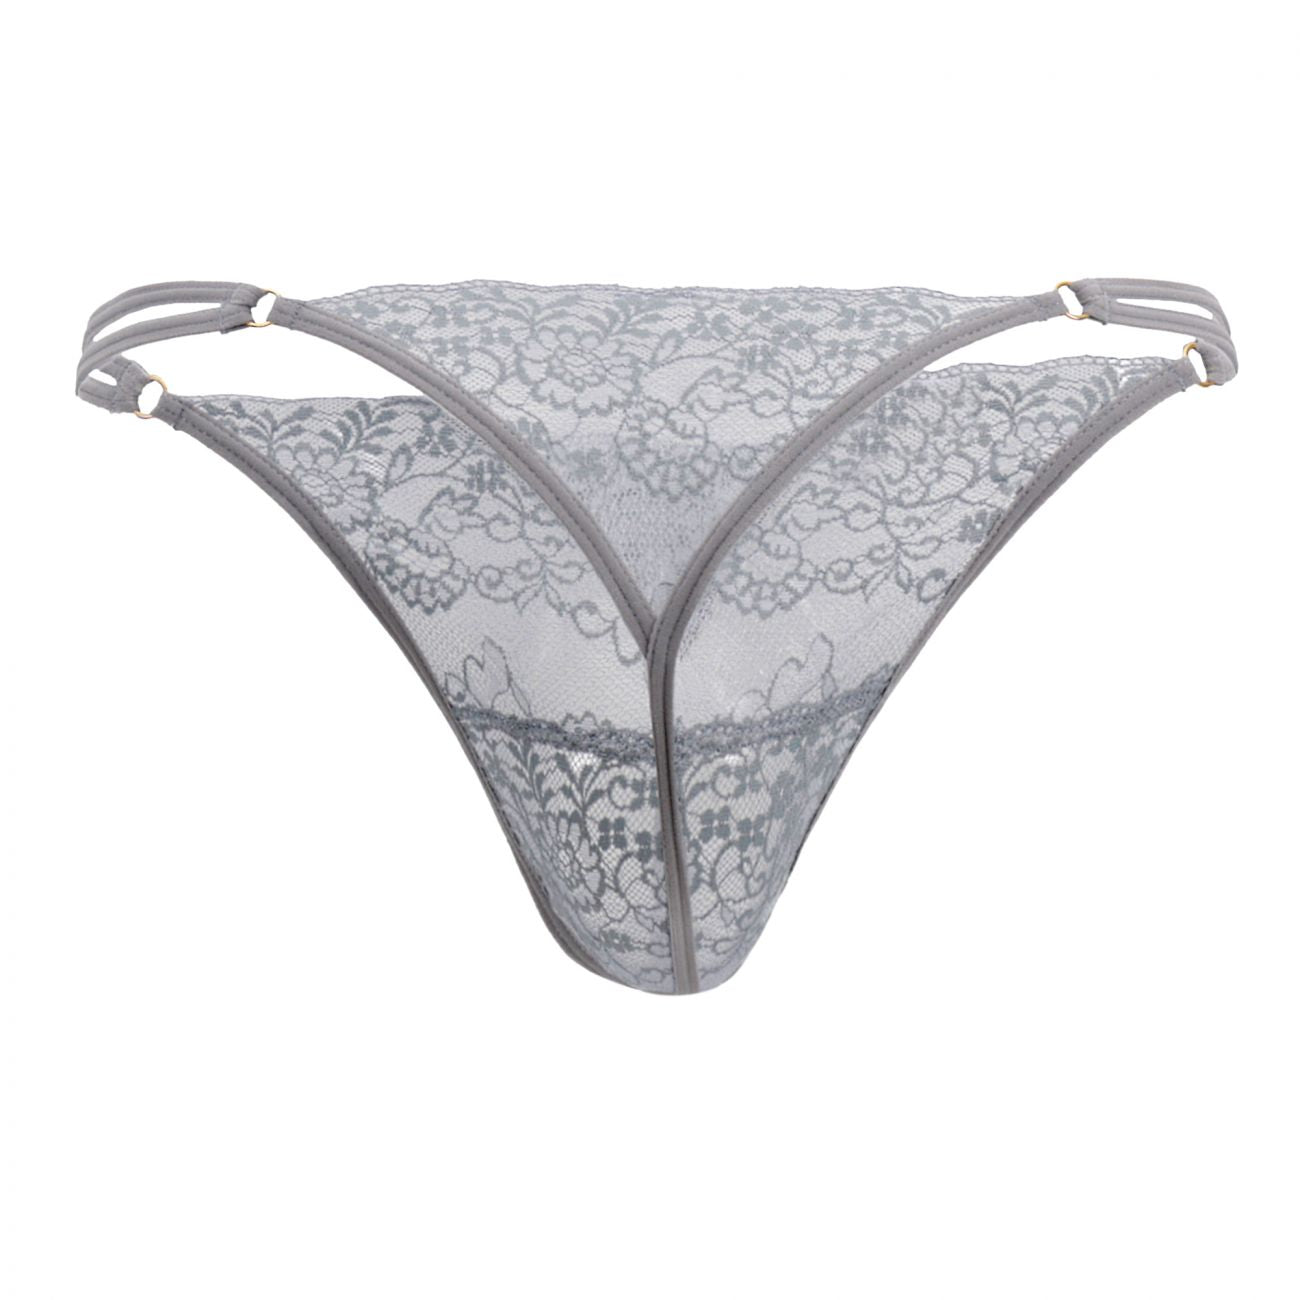 Lace G-String Thongs